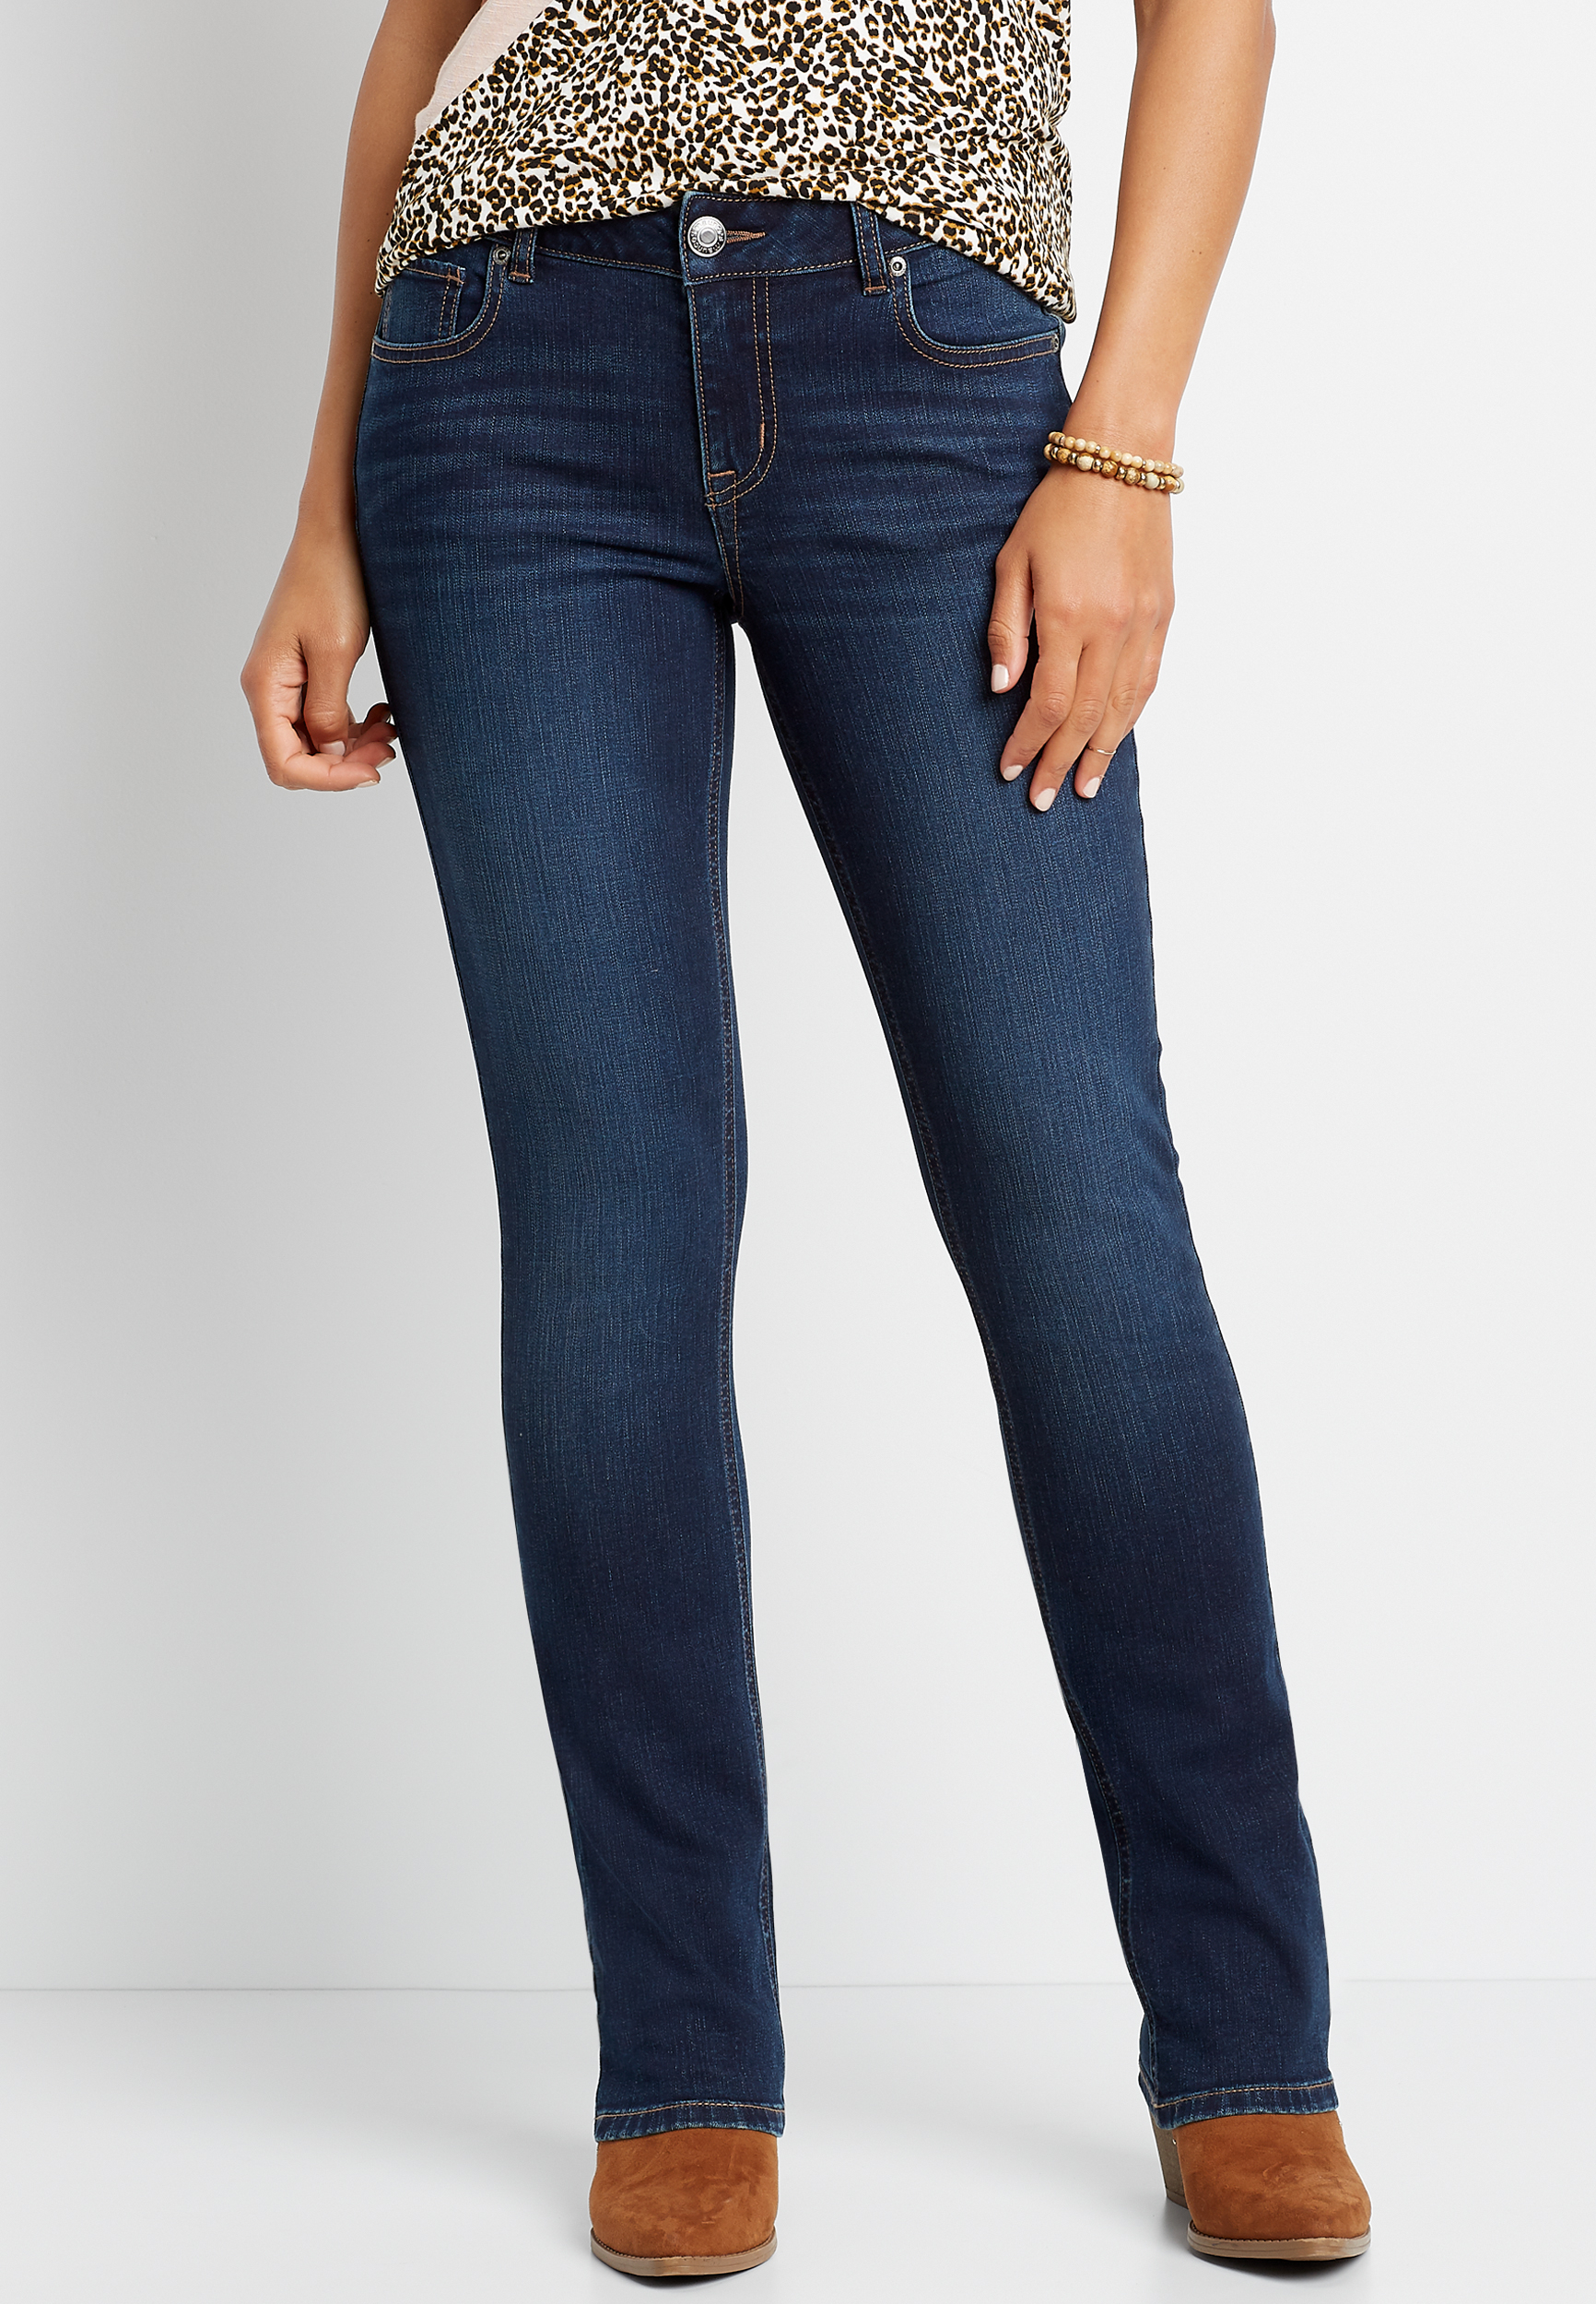 maurices jean sale